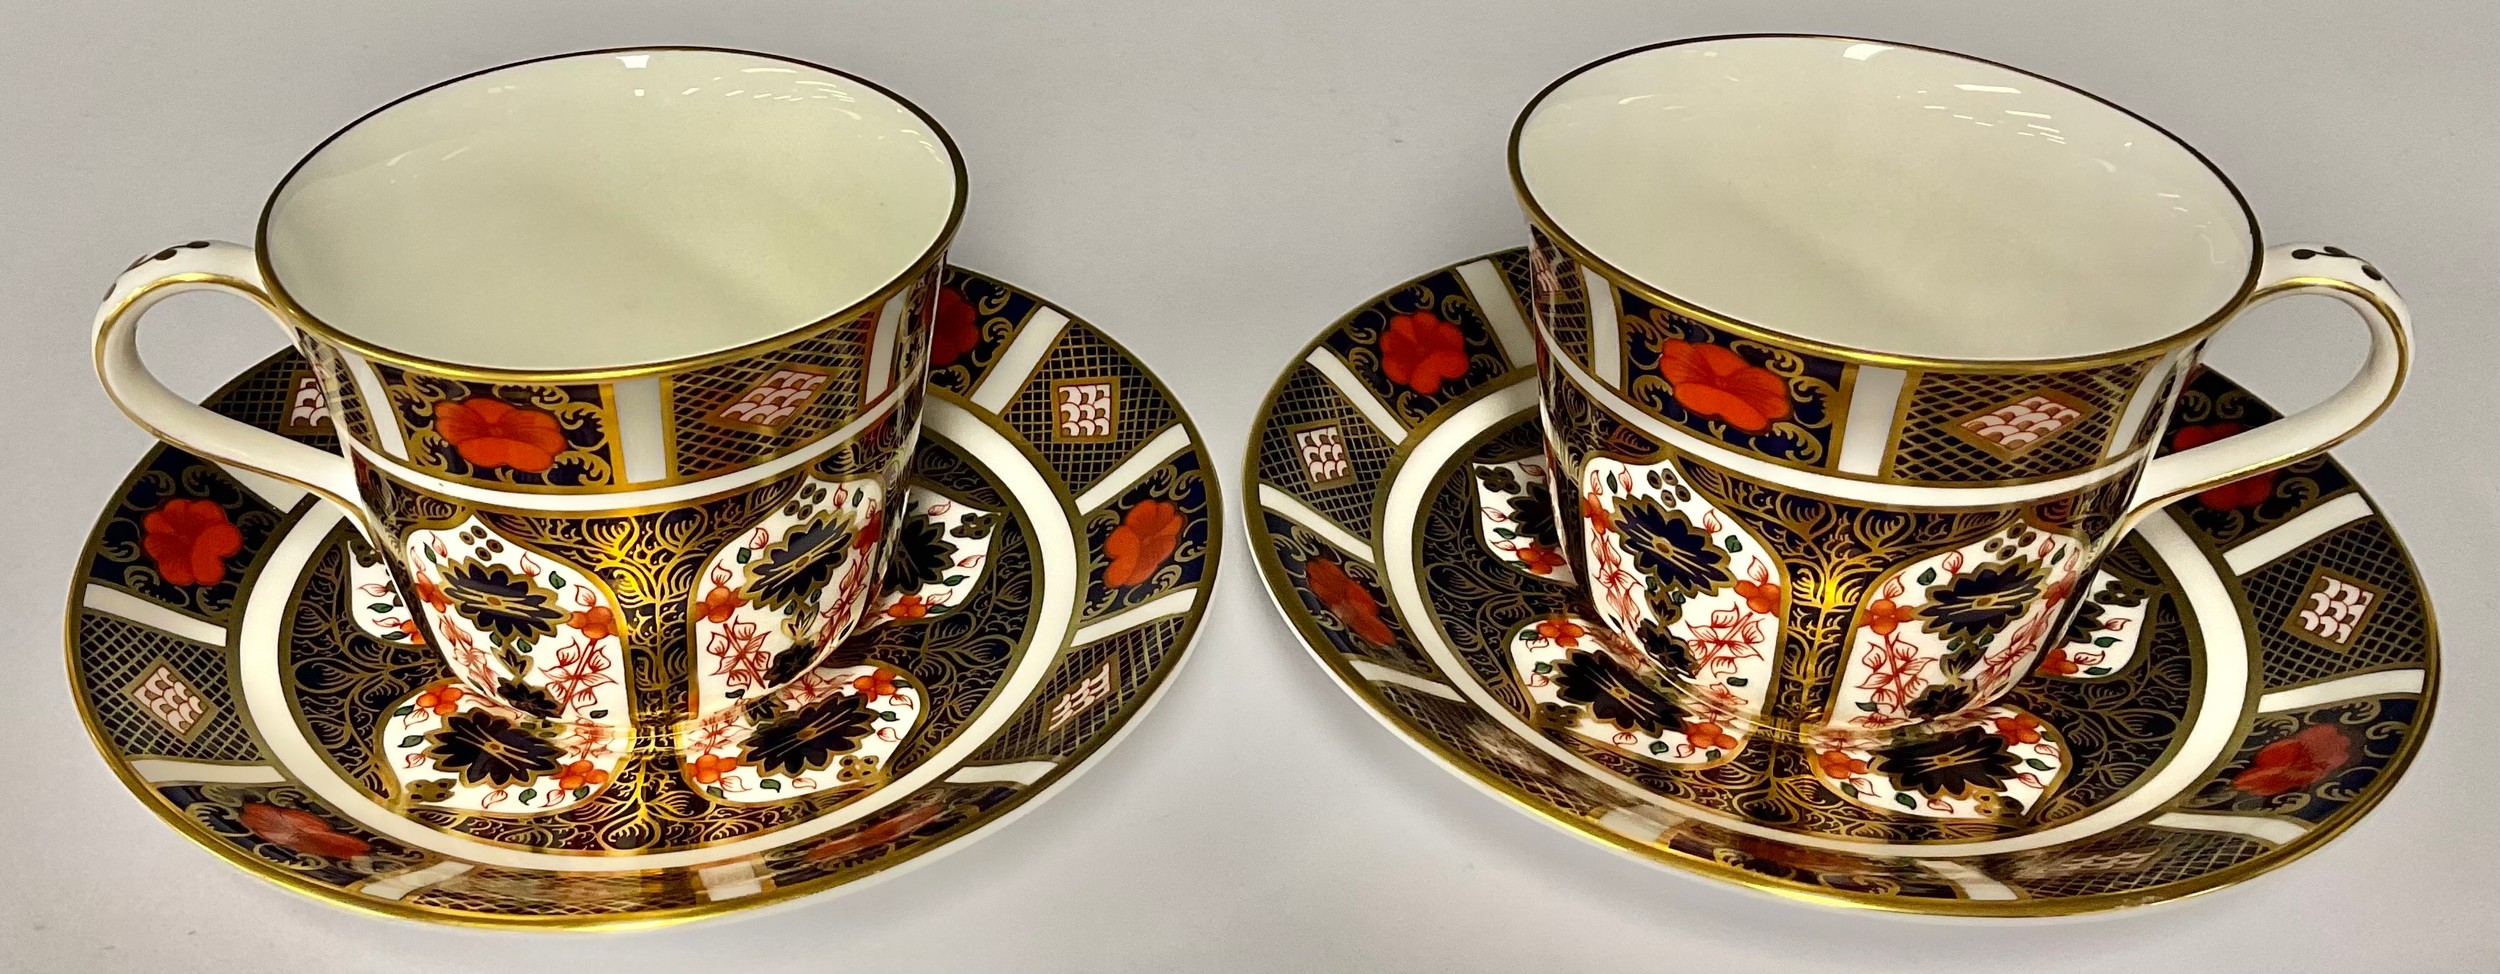 A pair of Royal Crown Derby Imari 1128 pattern teacups and saucers, first quality (4)